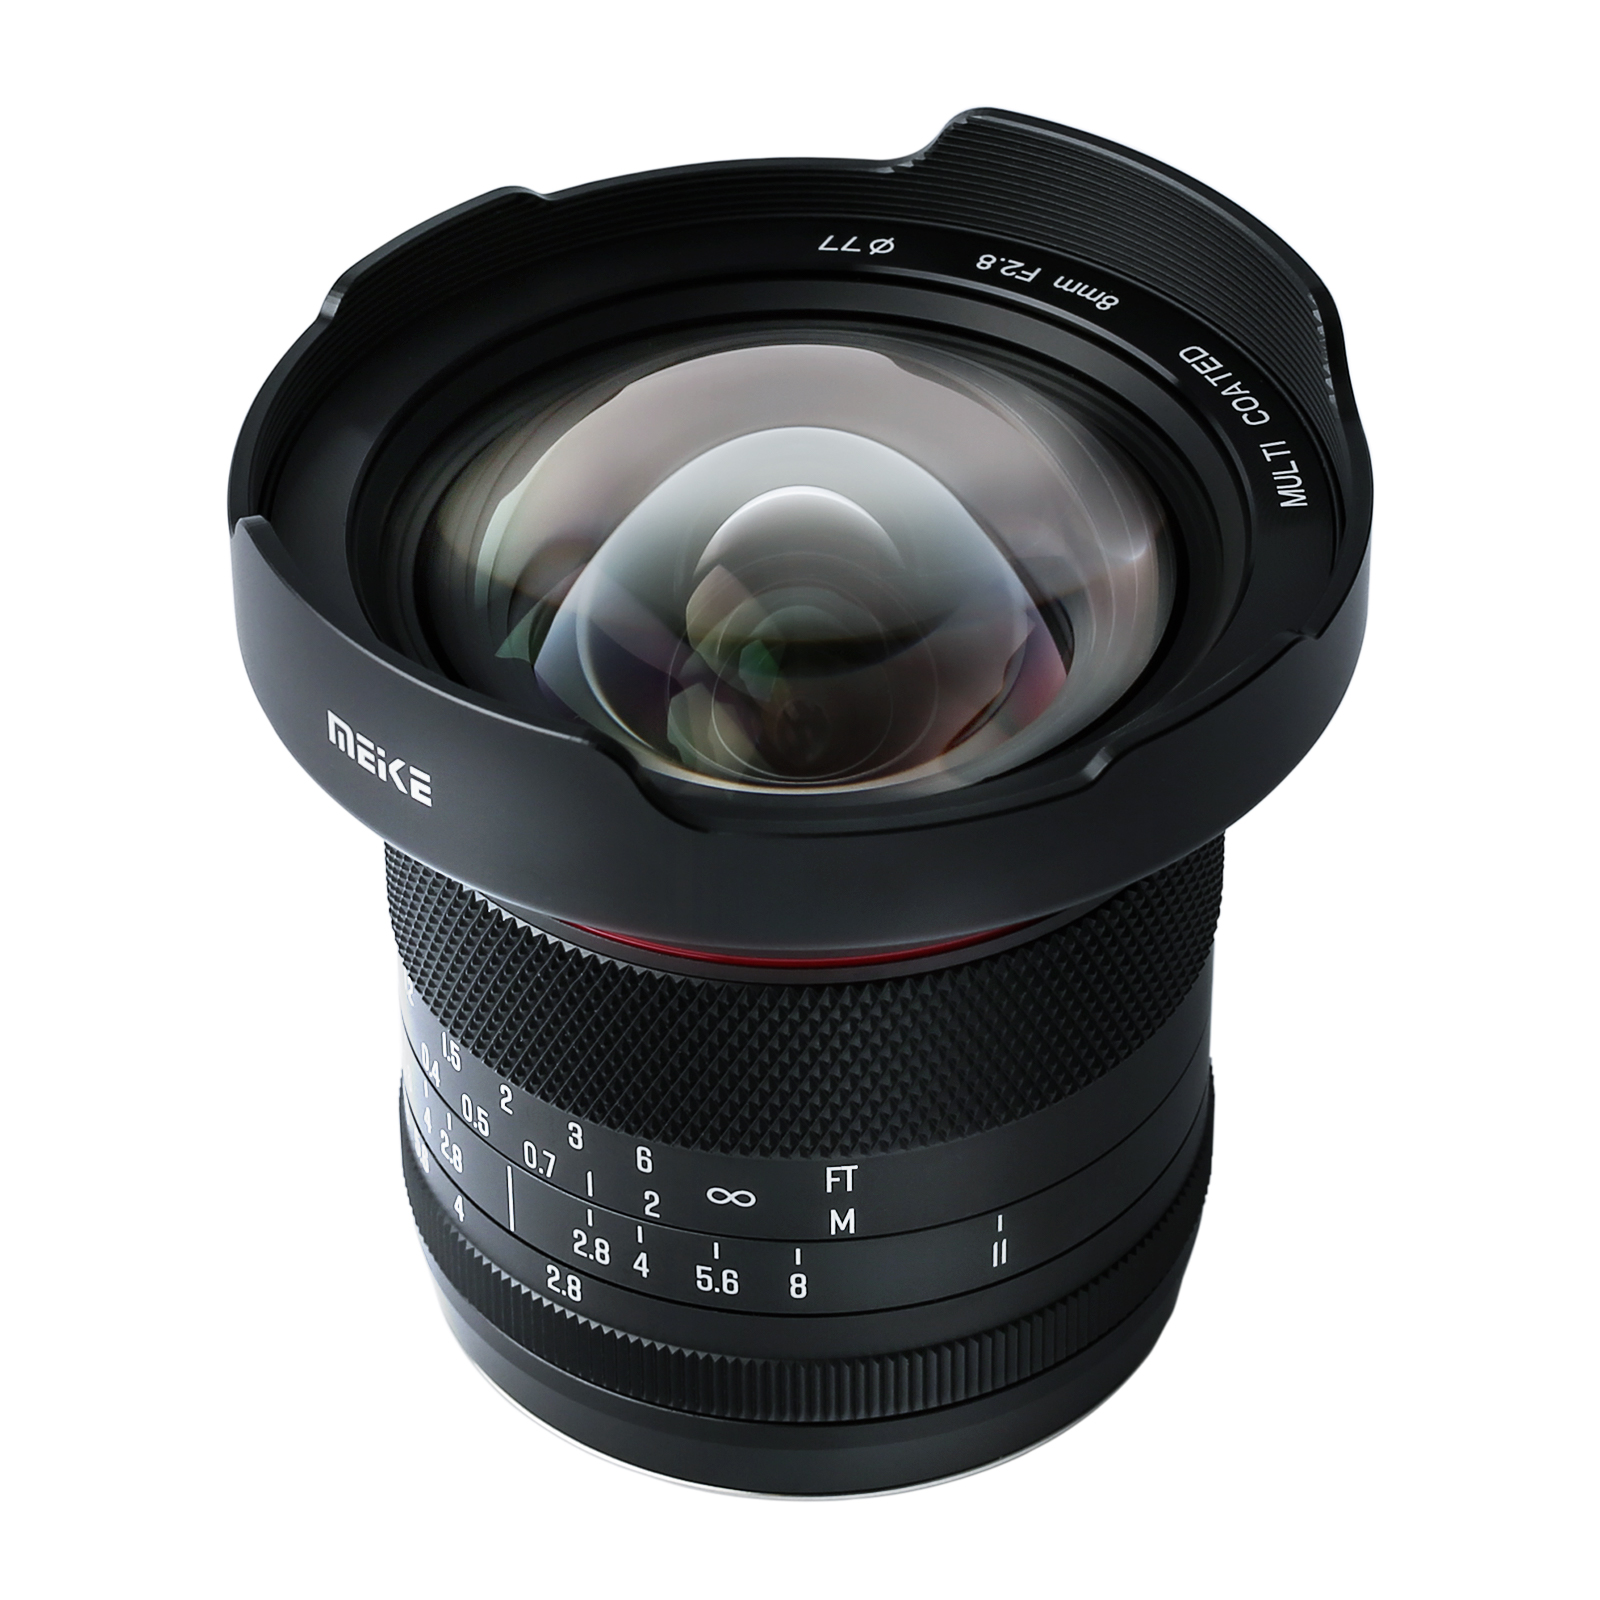 Meike 8mm F2.8 Prime Manual Focus Ultra-wide Angle and Zero Distortion Lens